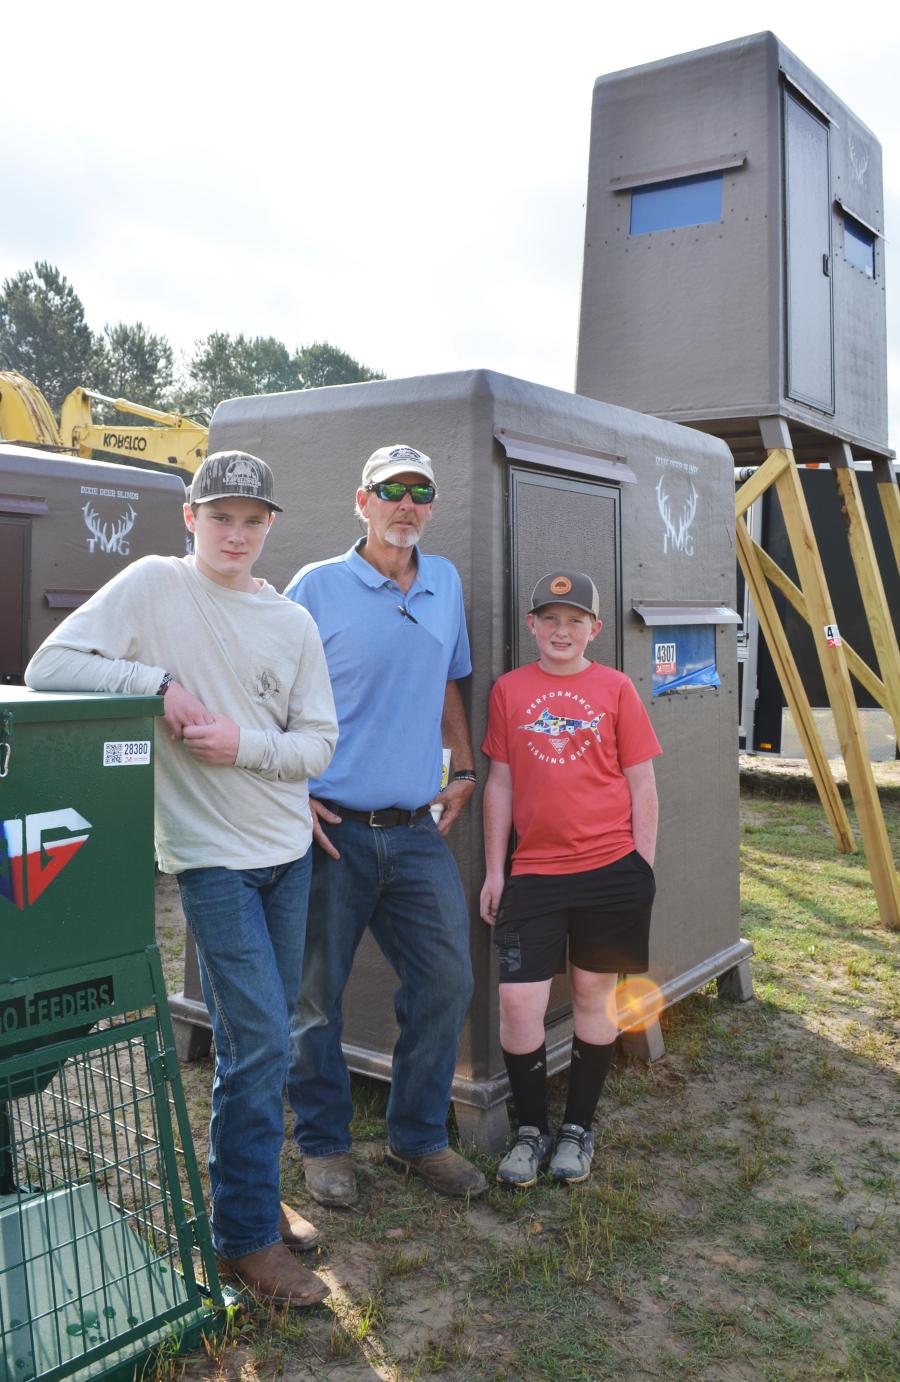 A regular seller in the Joey Martin sales, Heath Dorman (C) and his sons, George (L) and Landon of Leavellwood Inc., were auctioning a large selection of fiberglass shooting houses and deer feeders. The Eutaw, Ala.-based company is the largest manufacturer/distributor of shooting houses east of the Mississippi River.  
(CEG photo)